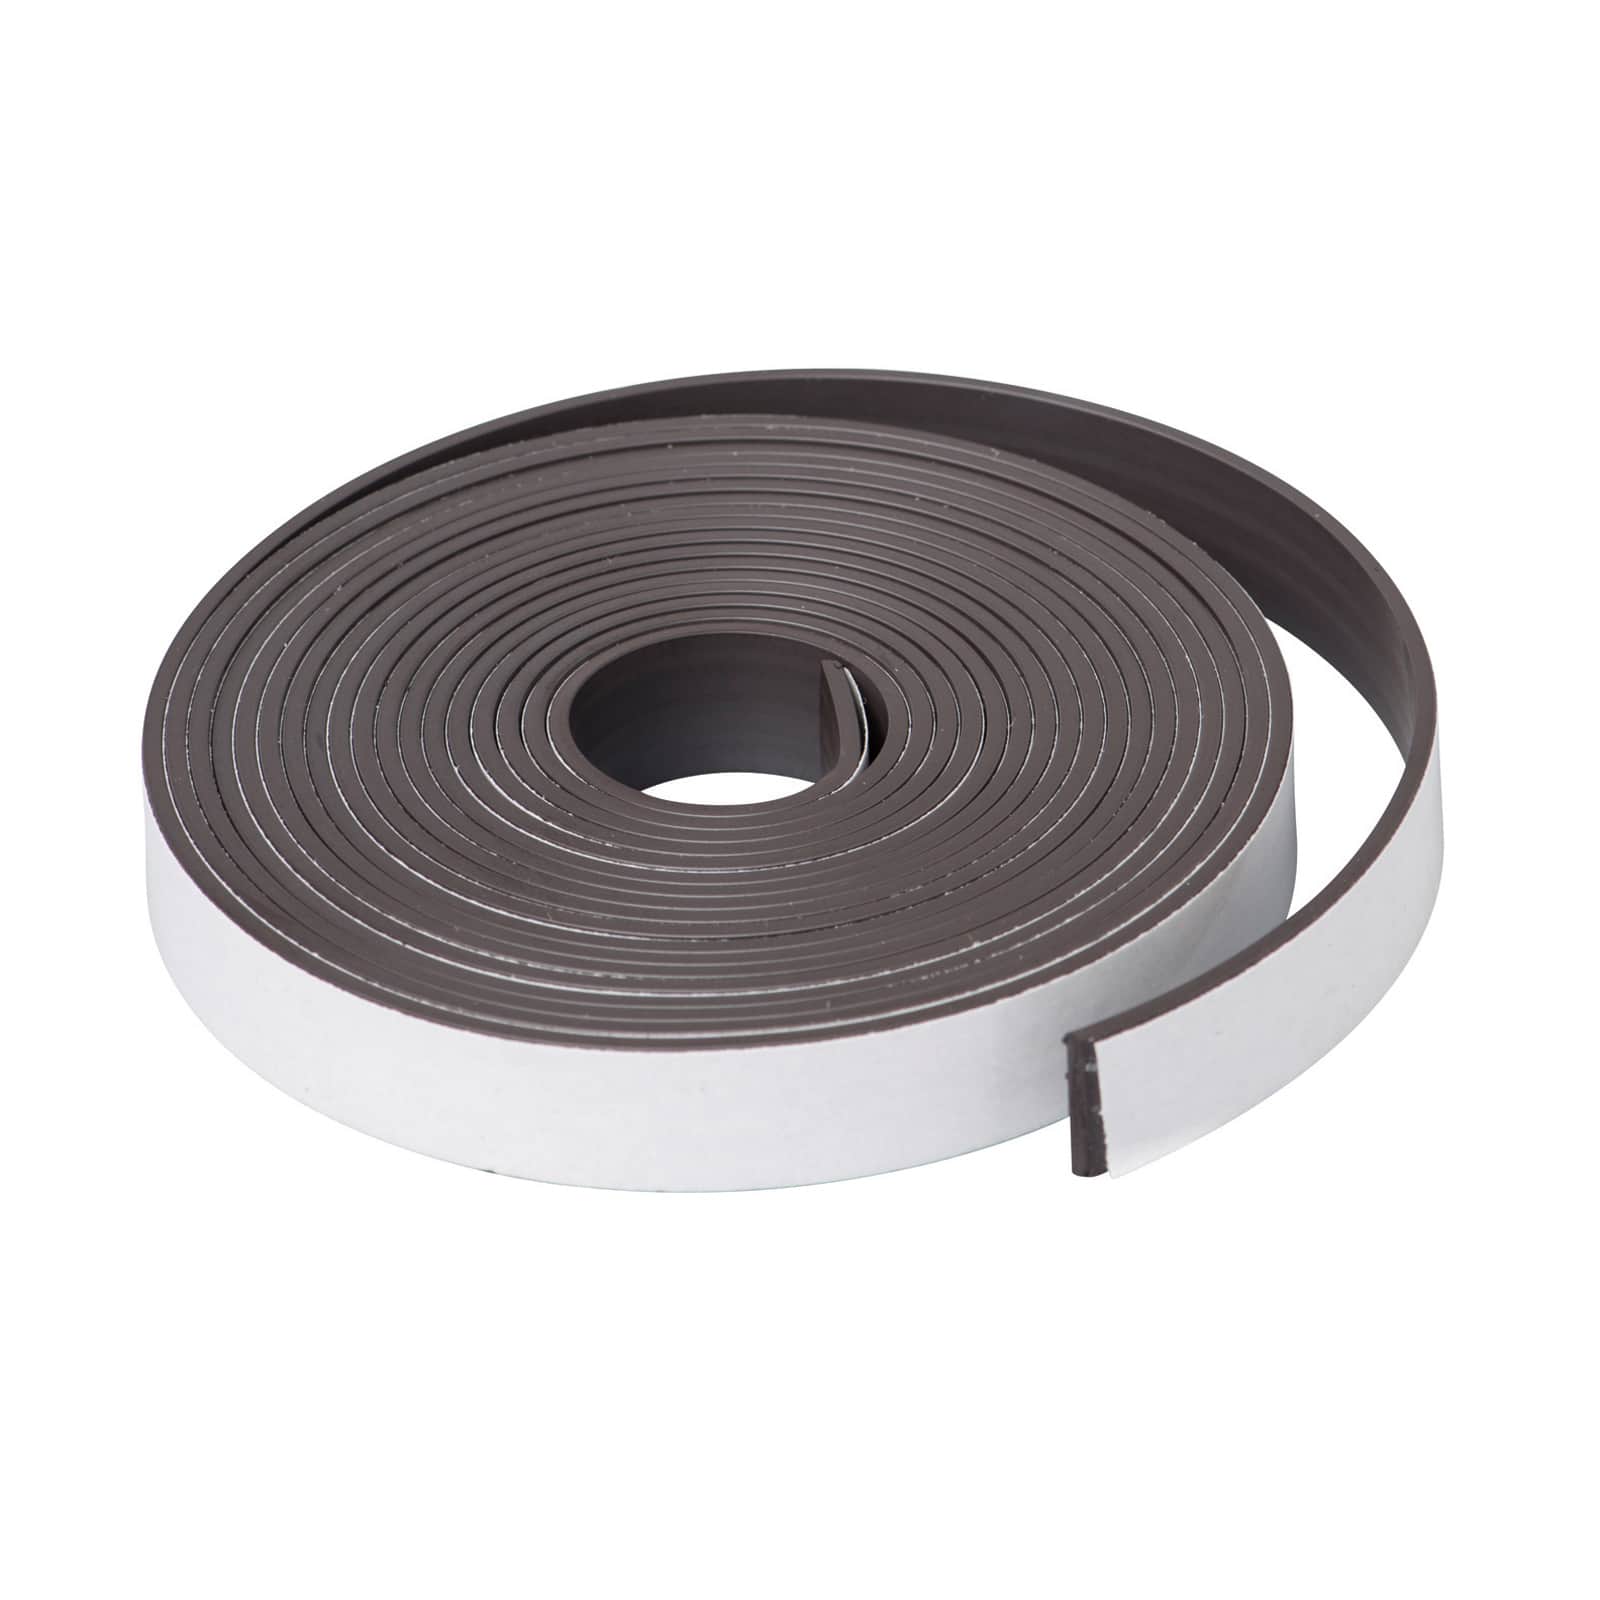 1" X 10' Roll of Magnet Strip w/ Adhesive 